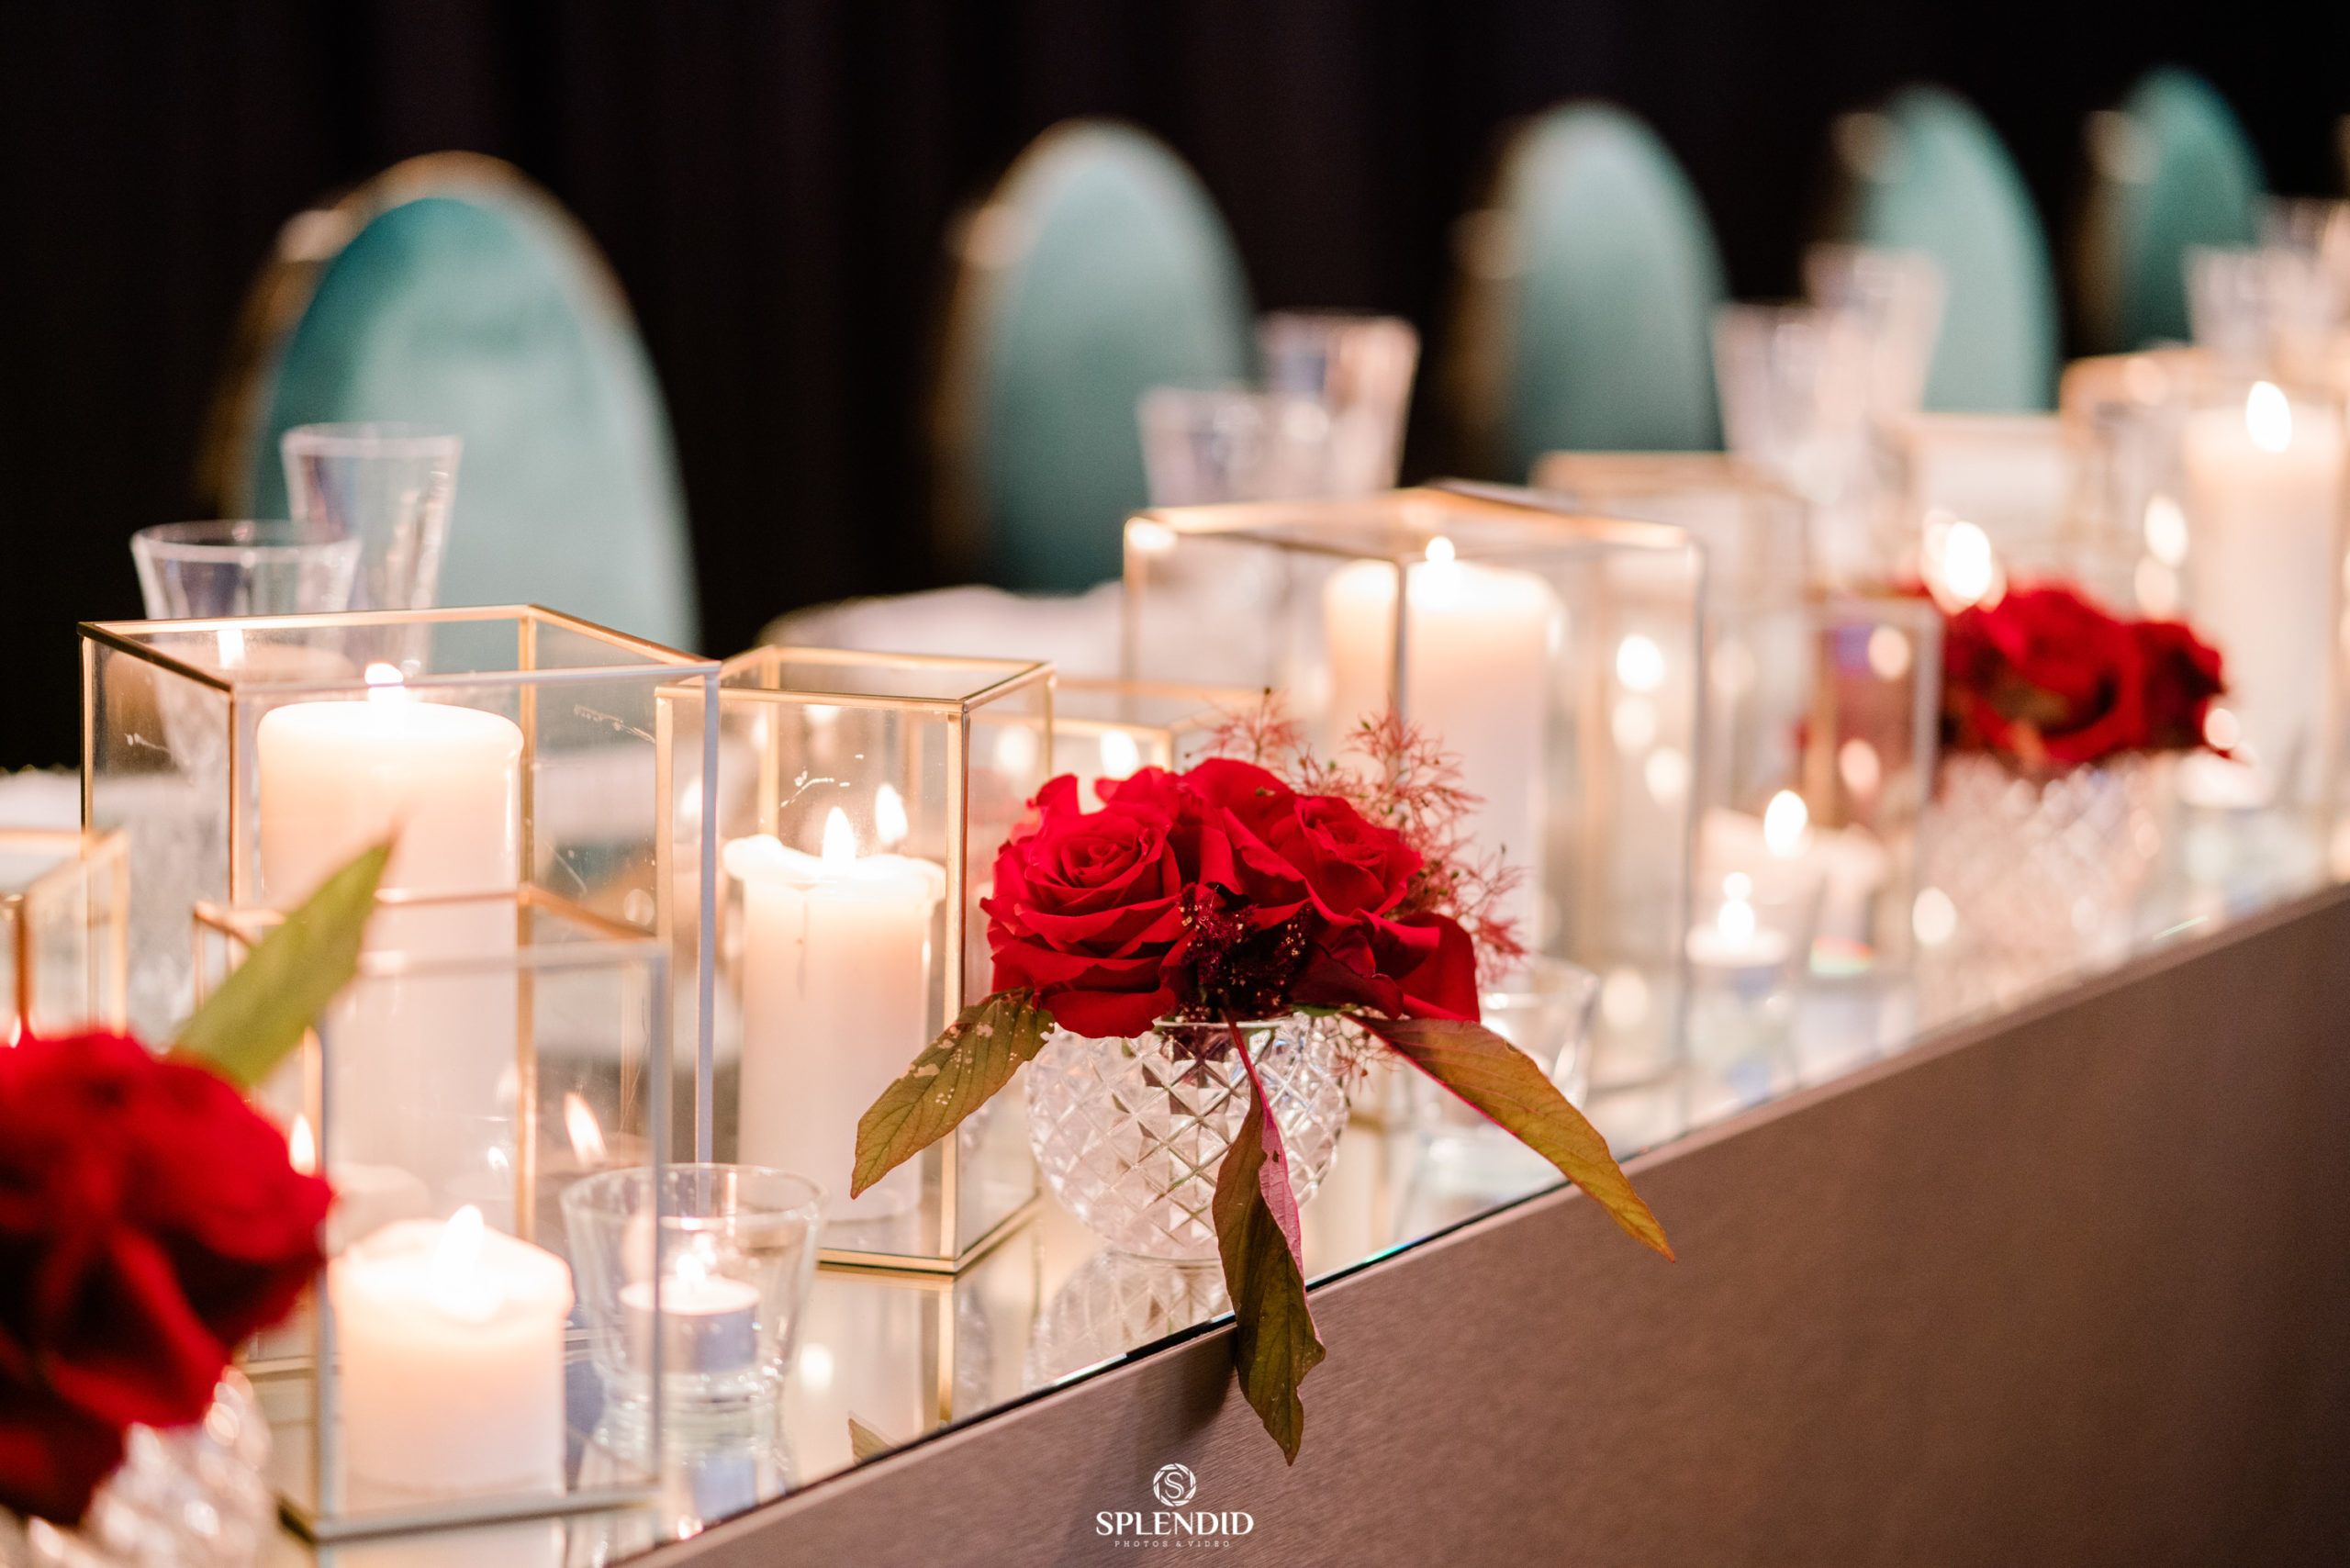 Choose Wedding Candle and Candelabra Centrepieces